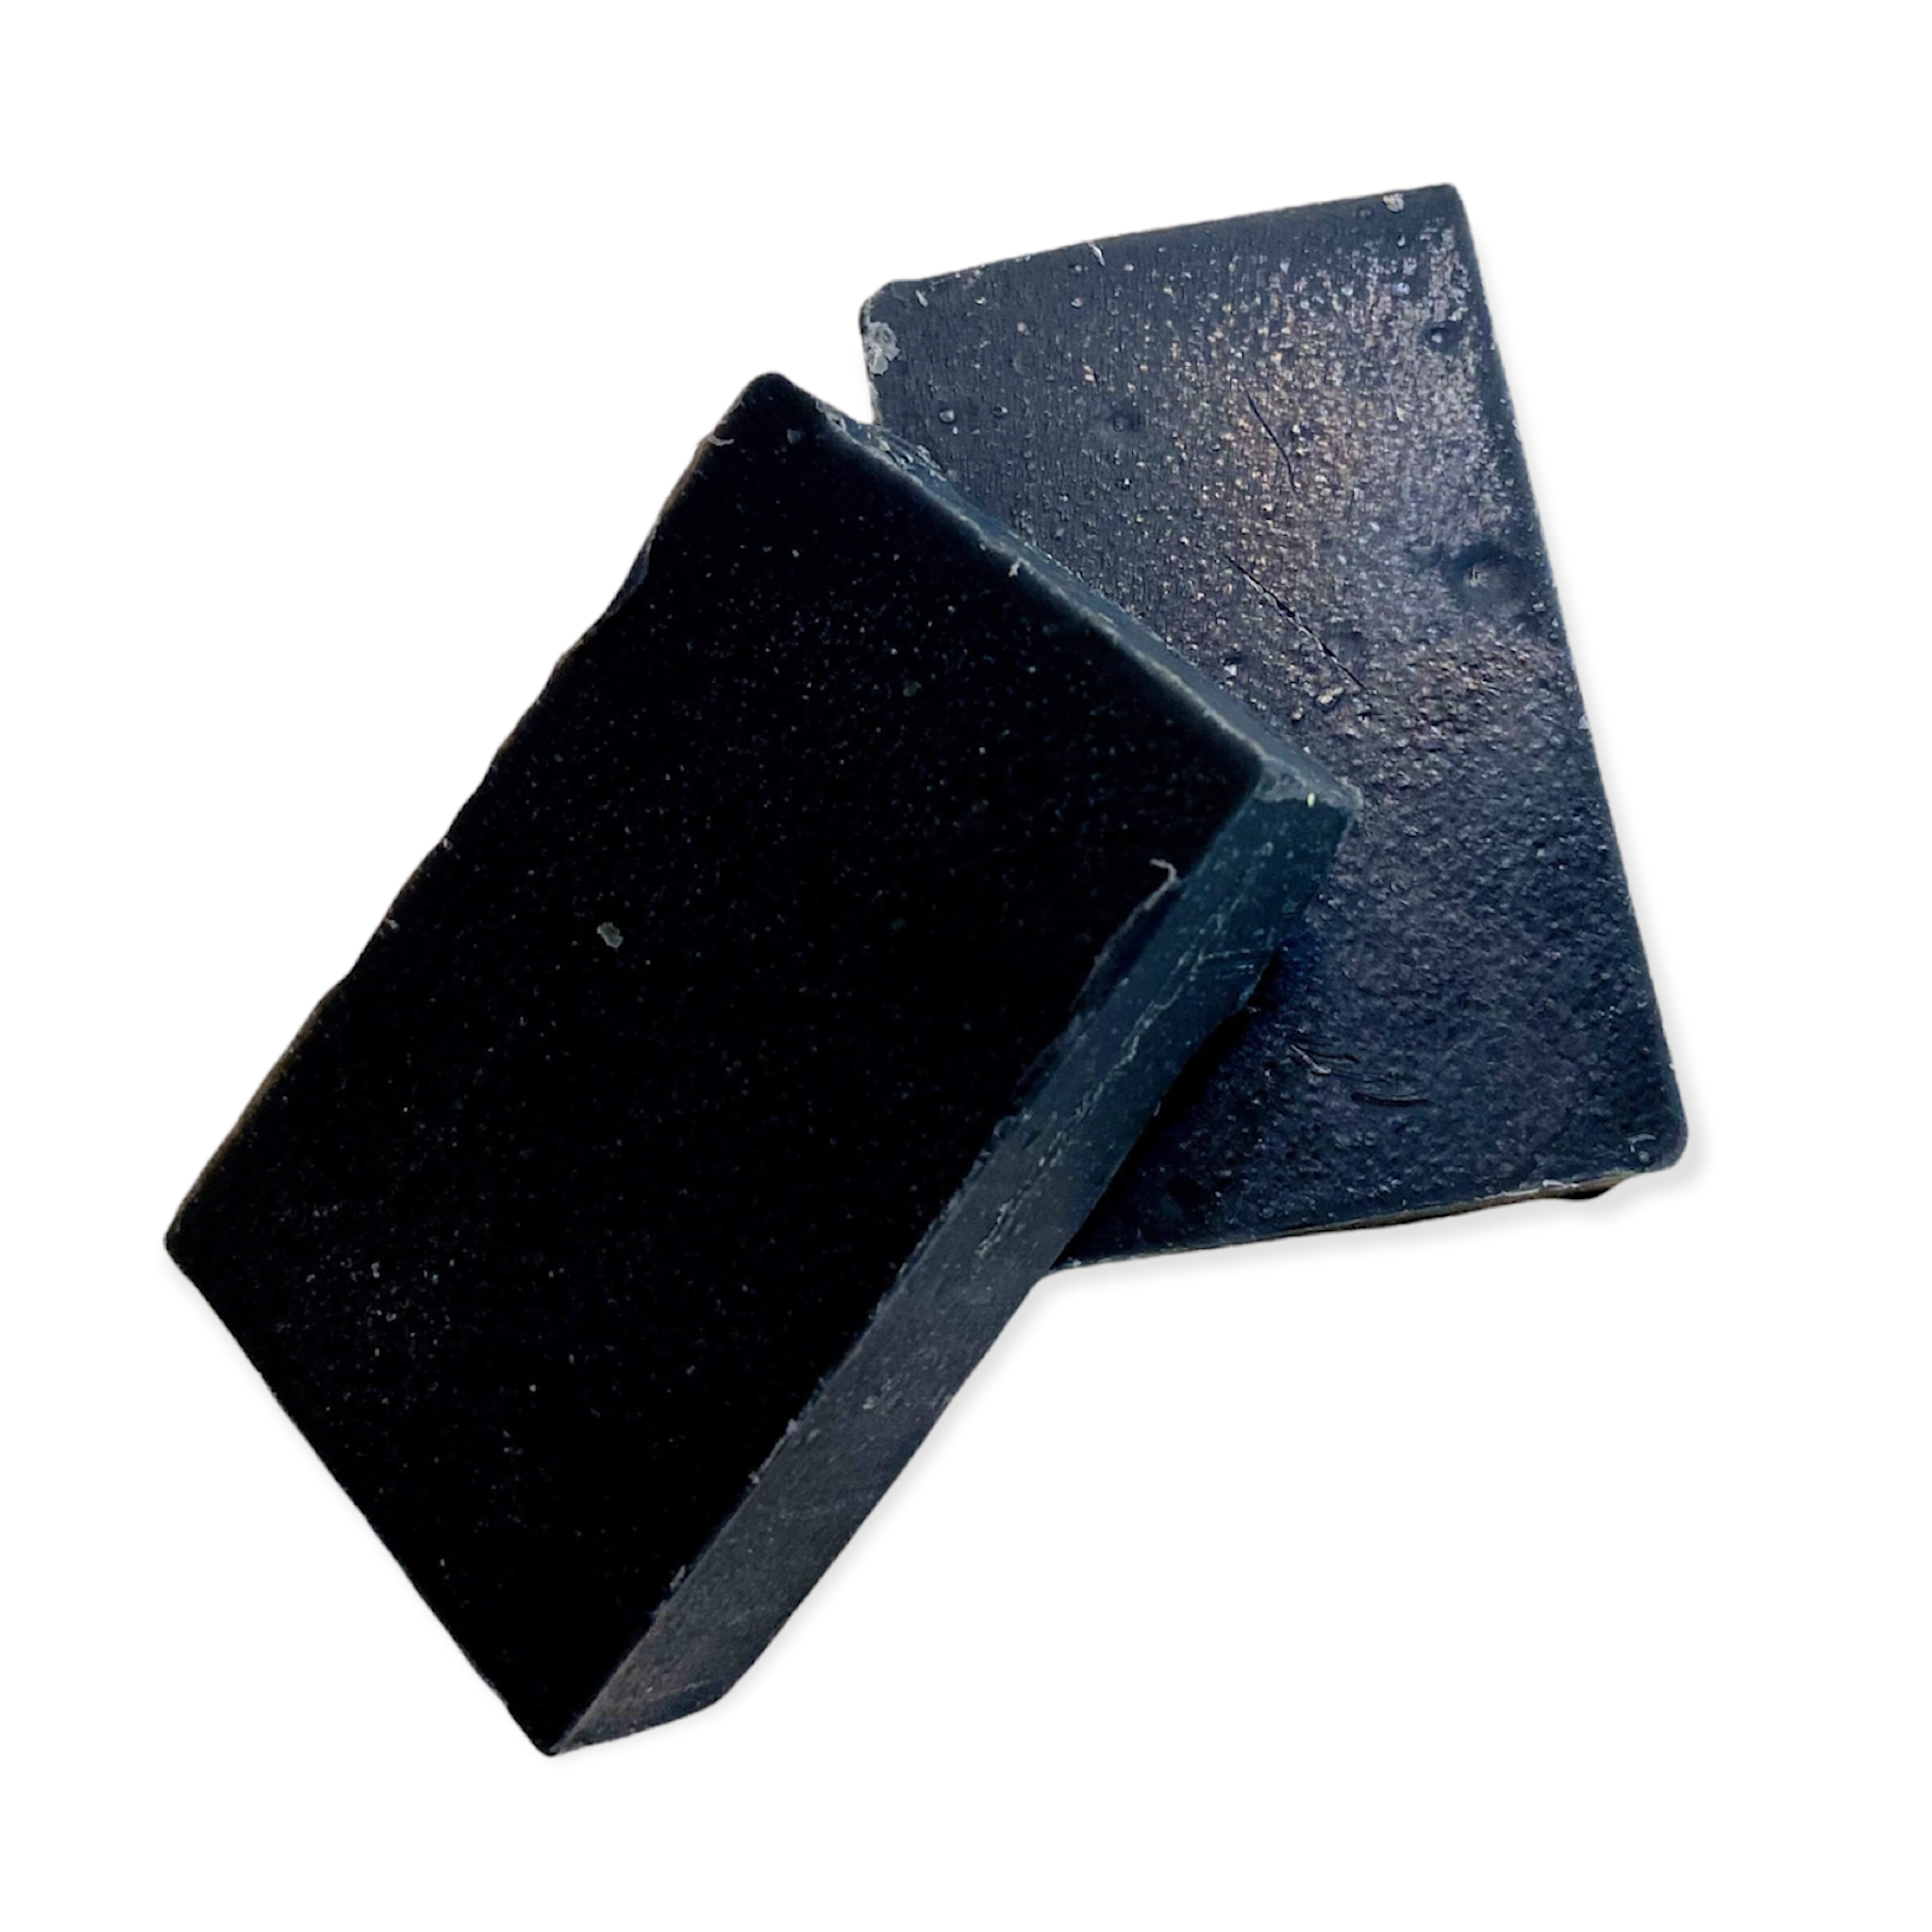 Activated Charcoal Black herbal Soap